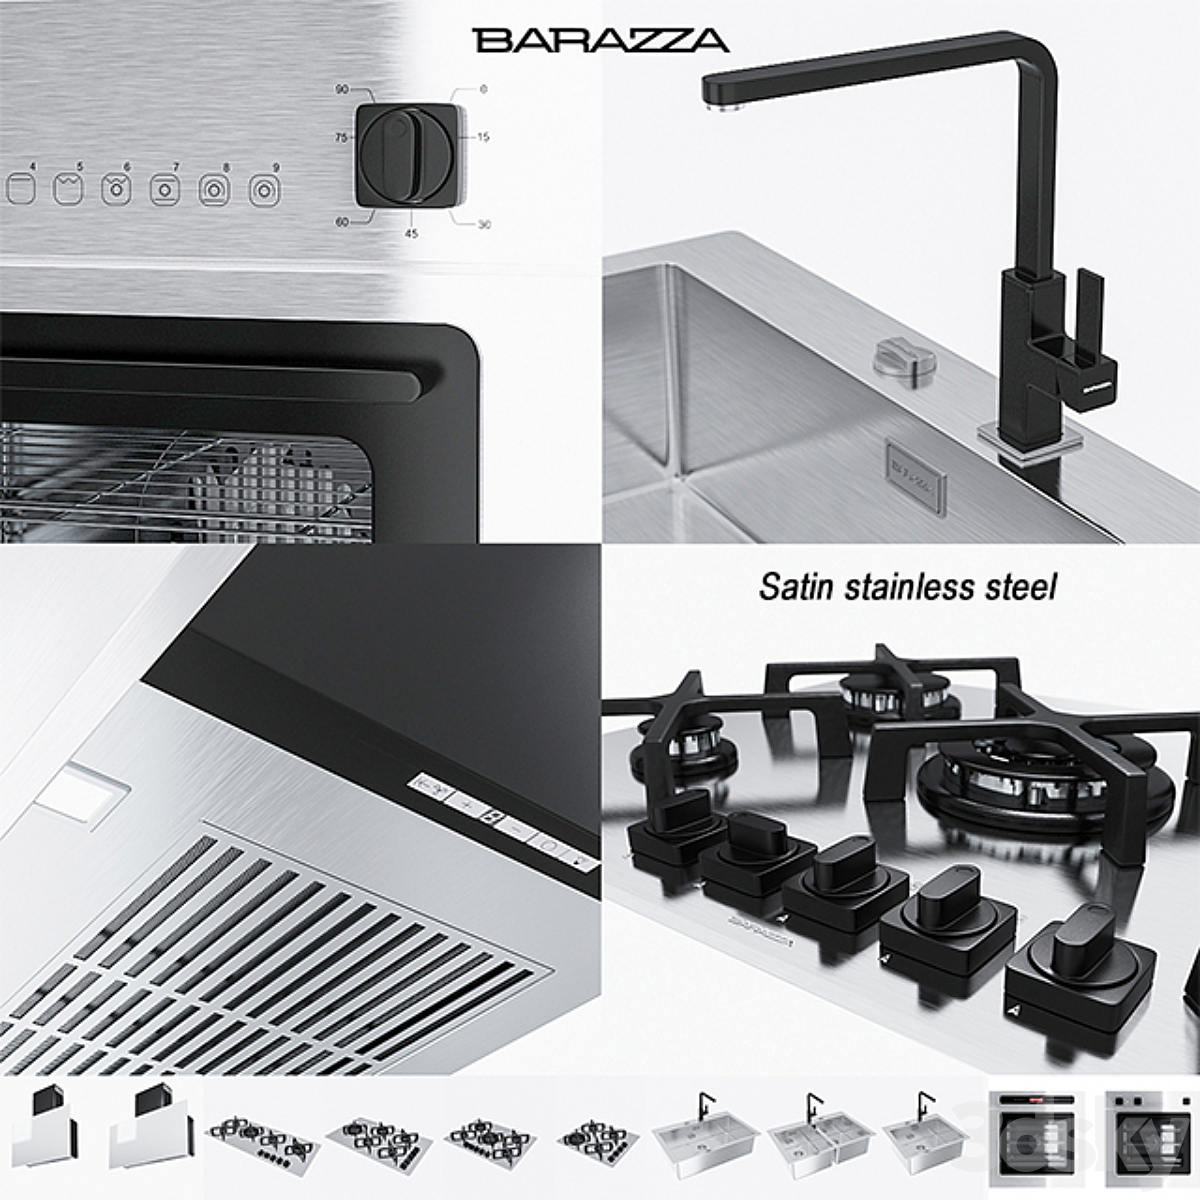 BARAZZA COLLECTIONS UNIQUE (Satin stainless steel)